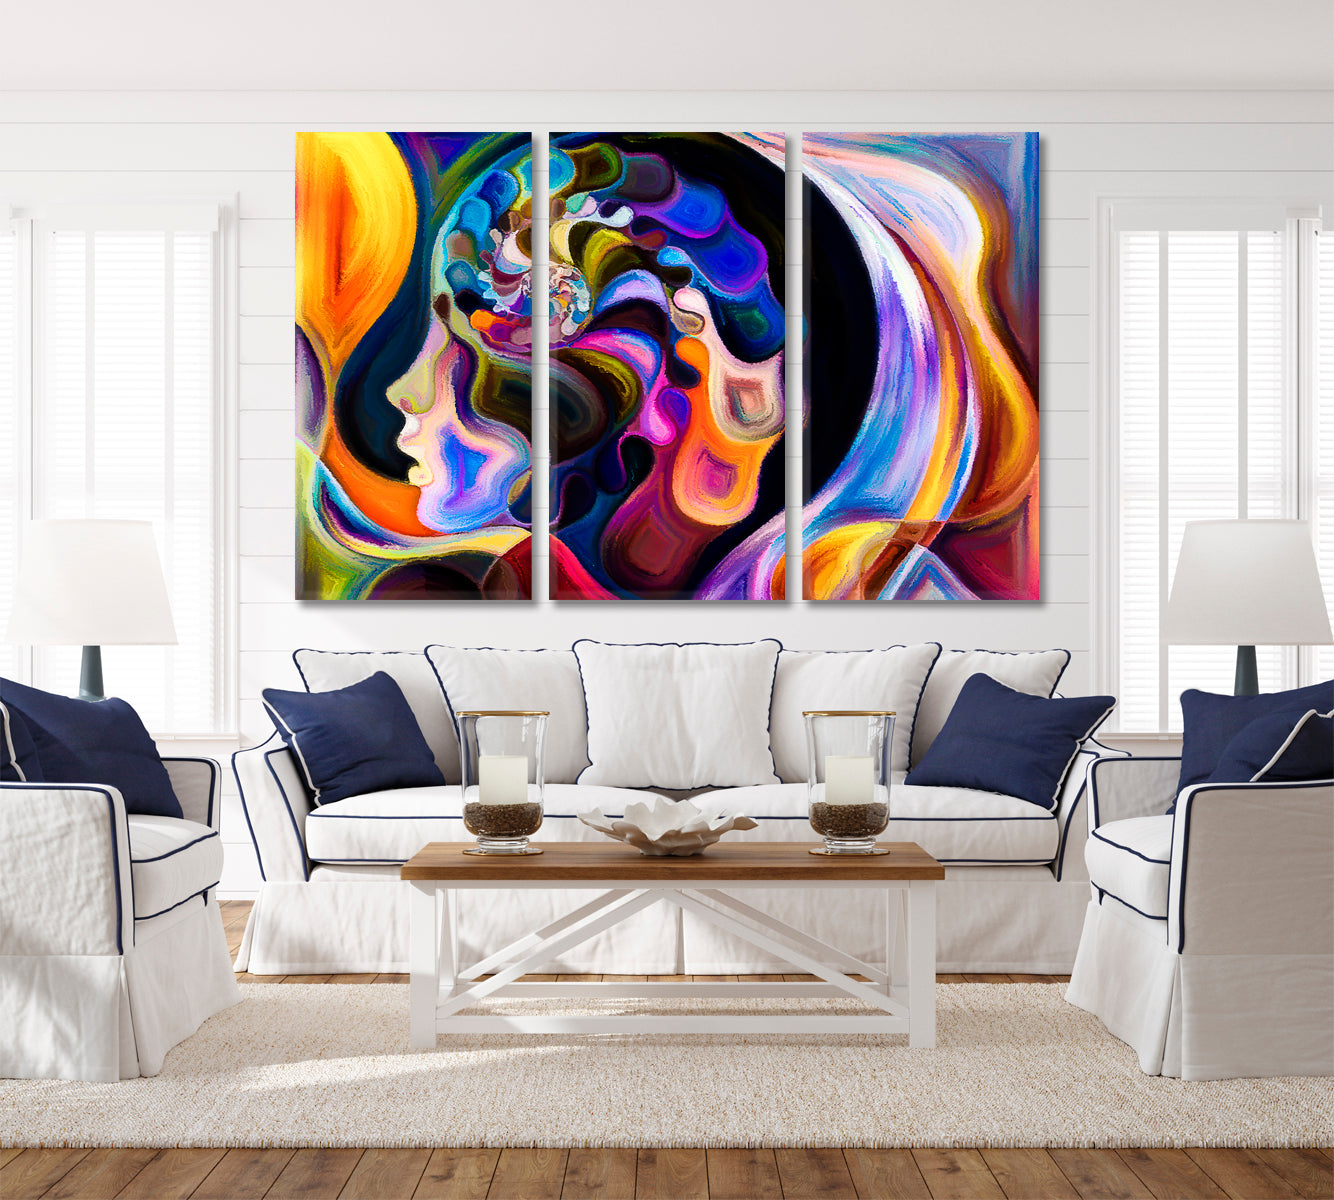 Life Forms In Mind Abstract Art Print Artesty 3 panels 36" x 24" 